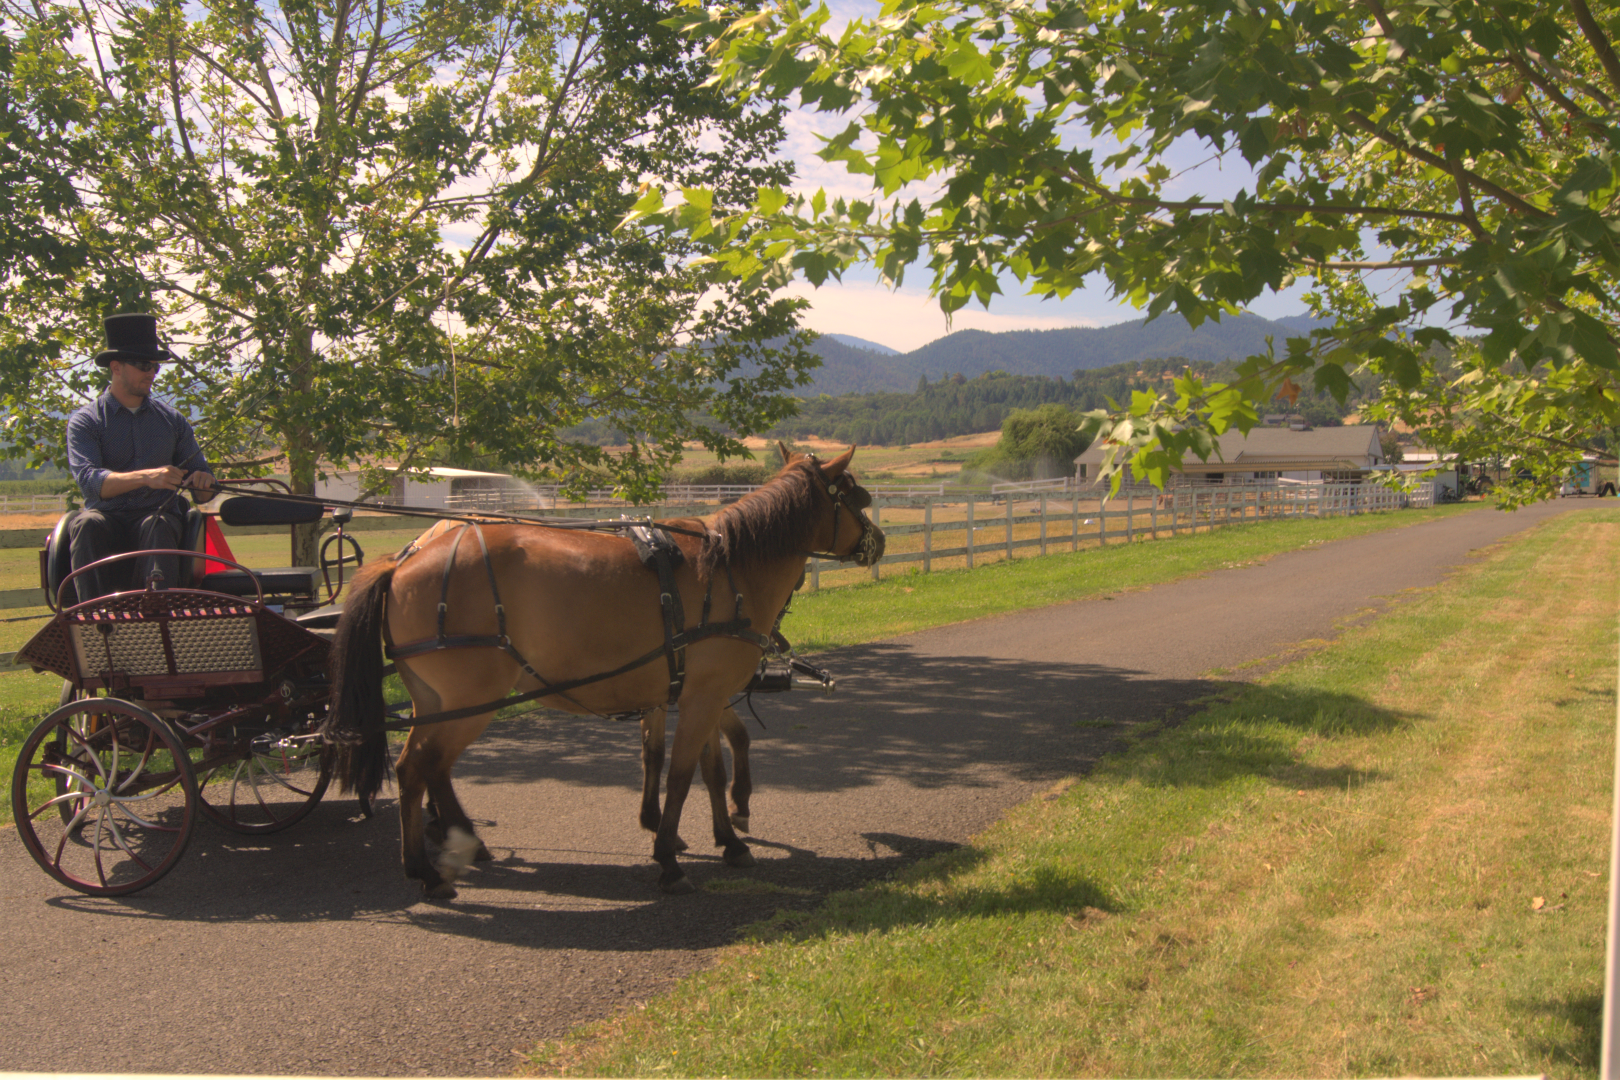 Horse-drawn carriage rides were one of many activities for visitors